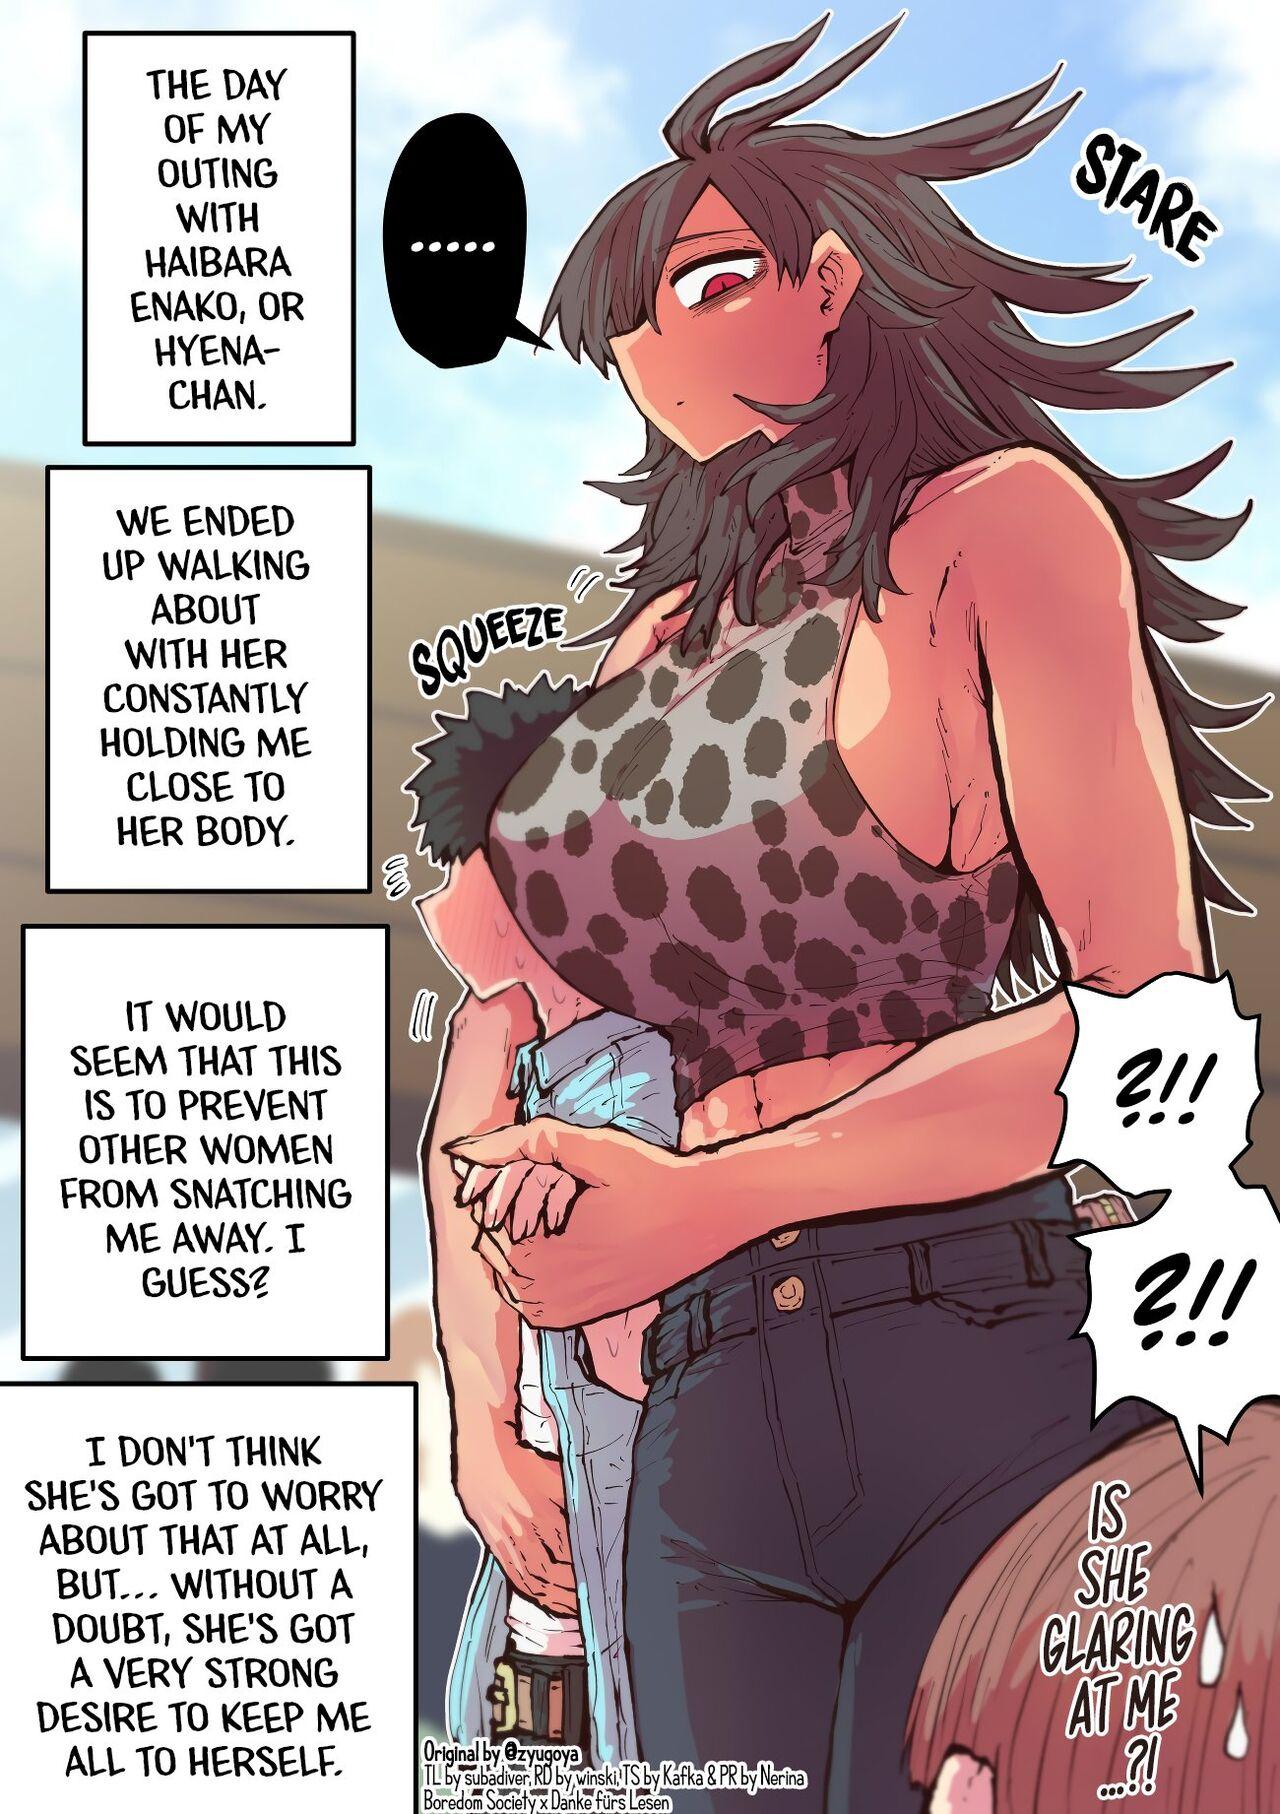 Gay Blondhair Being Targeted by Hyena-chan - Original Free Blowjob - Page 8